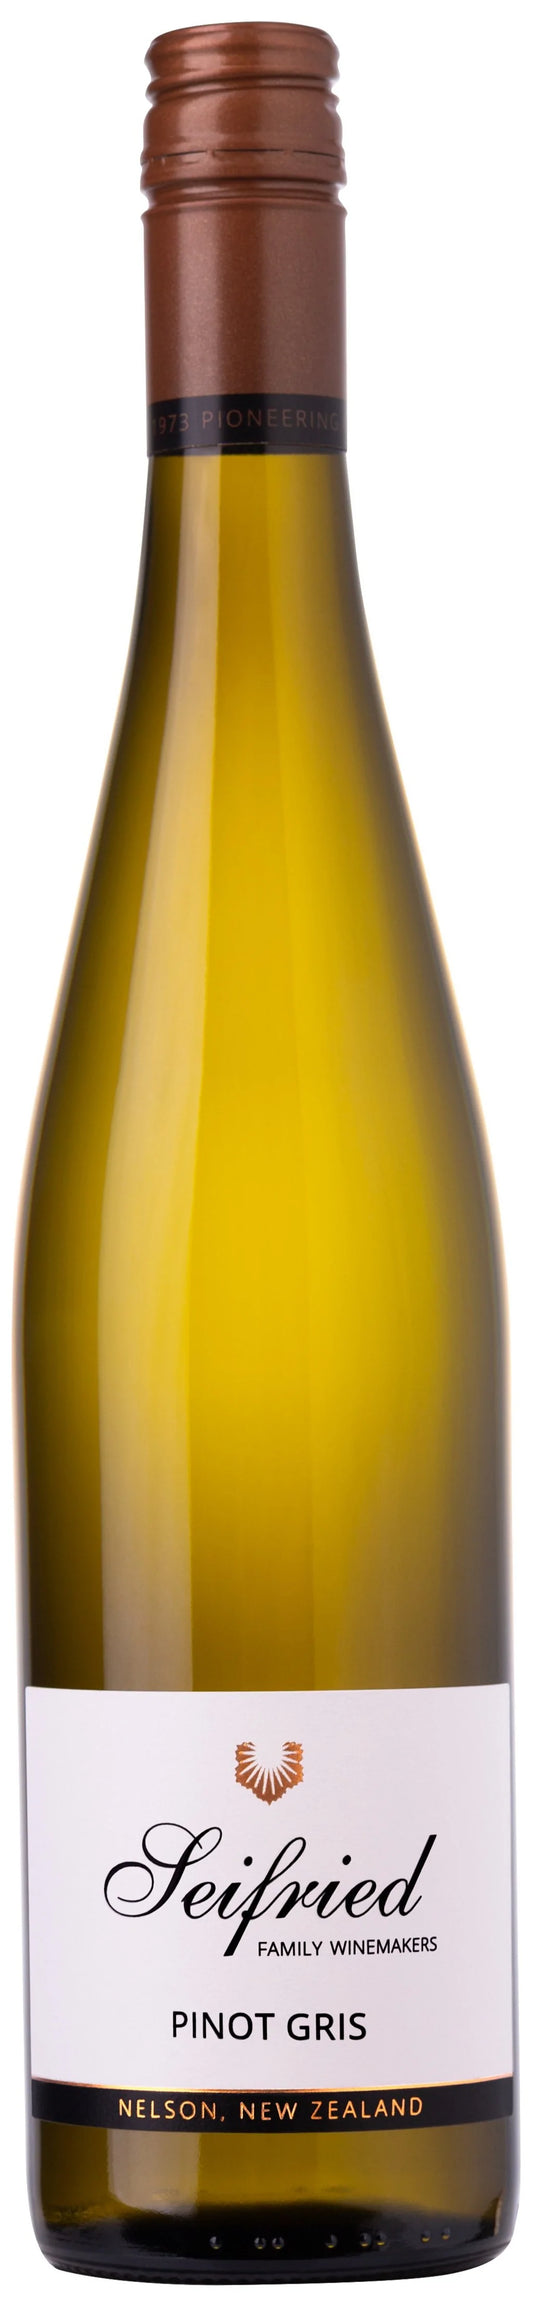 Seifried Pinot Gris